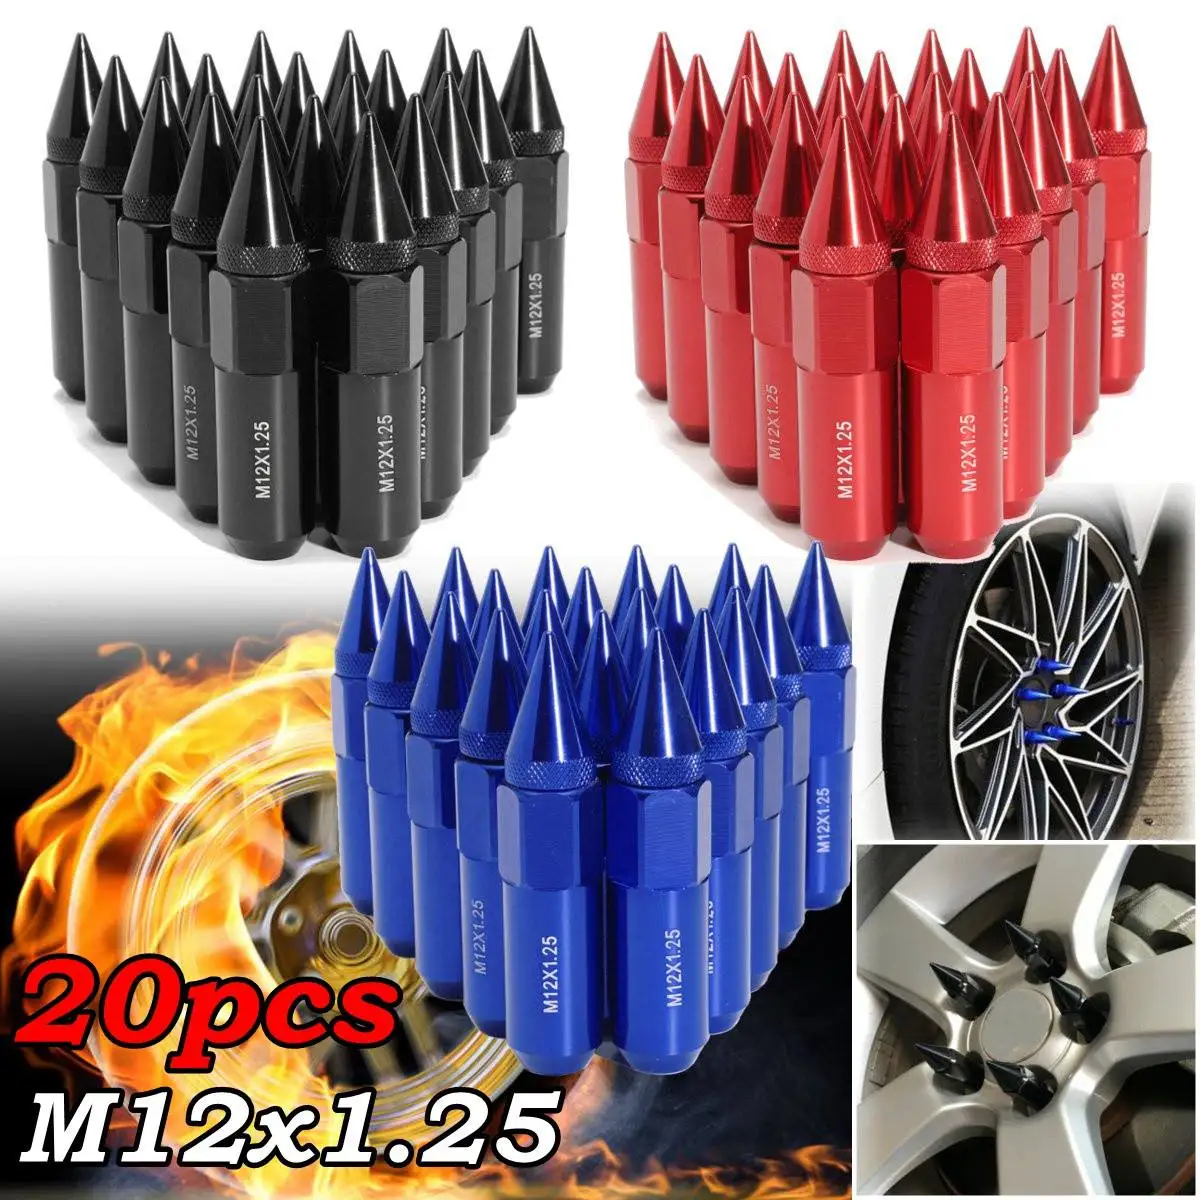 

20Pcs Aluminum M12X1.25 Car Wheels Rims Lug Nuts w/ Spiked 60mm Extended Tuner Blue/Red/Black